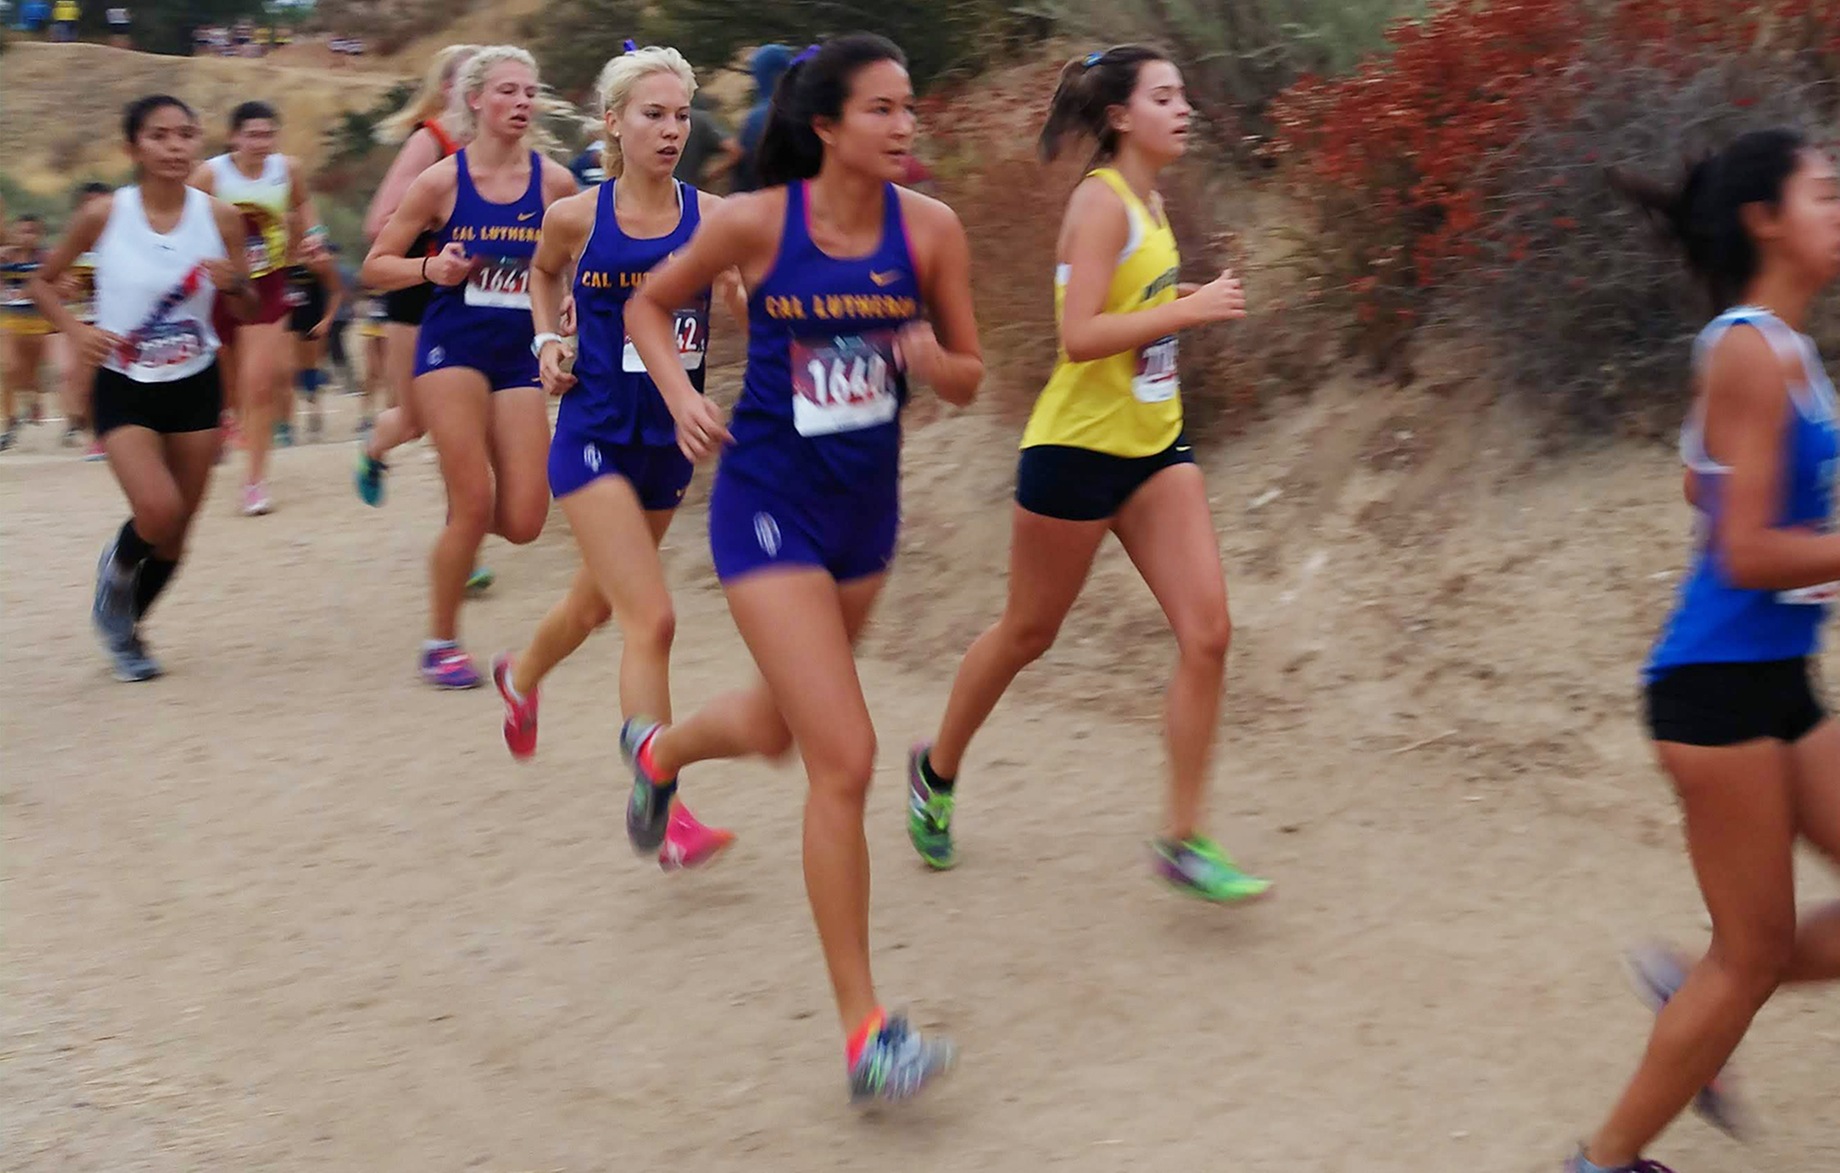 All Four Regals Improve Times at Master’s Invitational